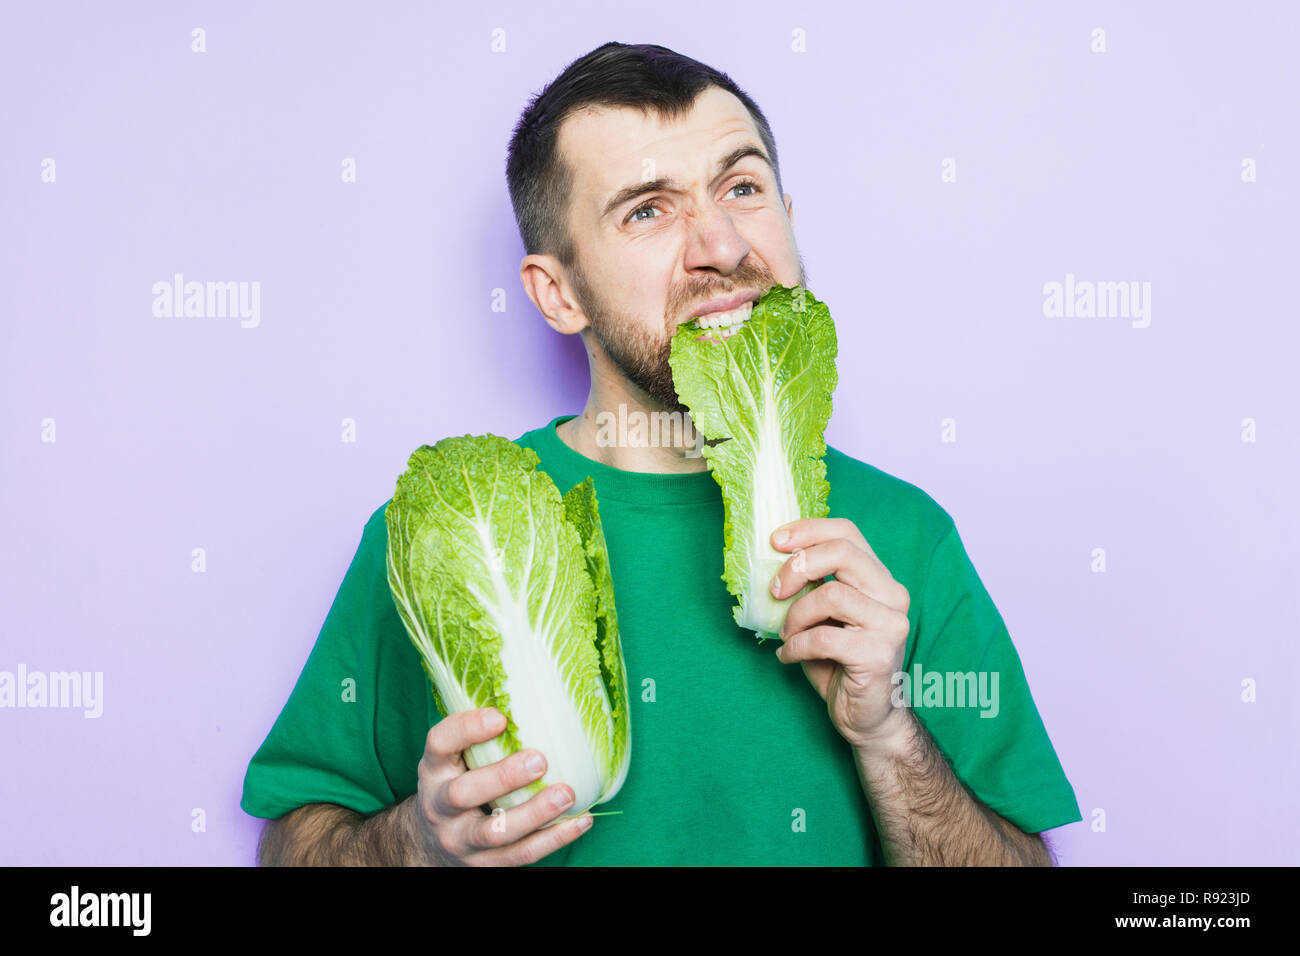 Young man biting on a leaf of Beijing napa cabbage, doubt face expression. Light purple background. Stock Photo